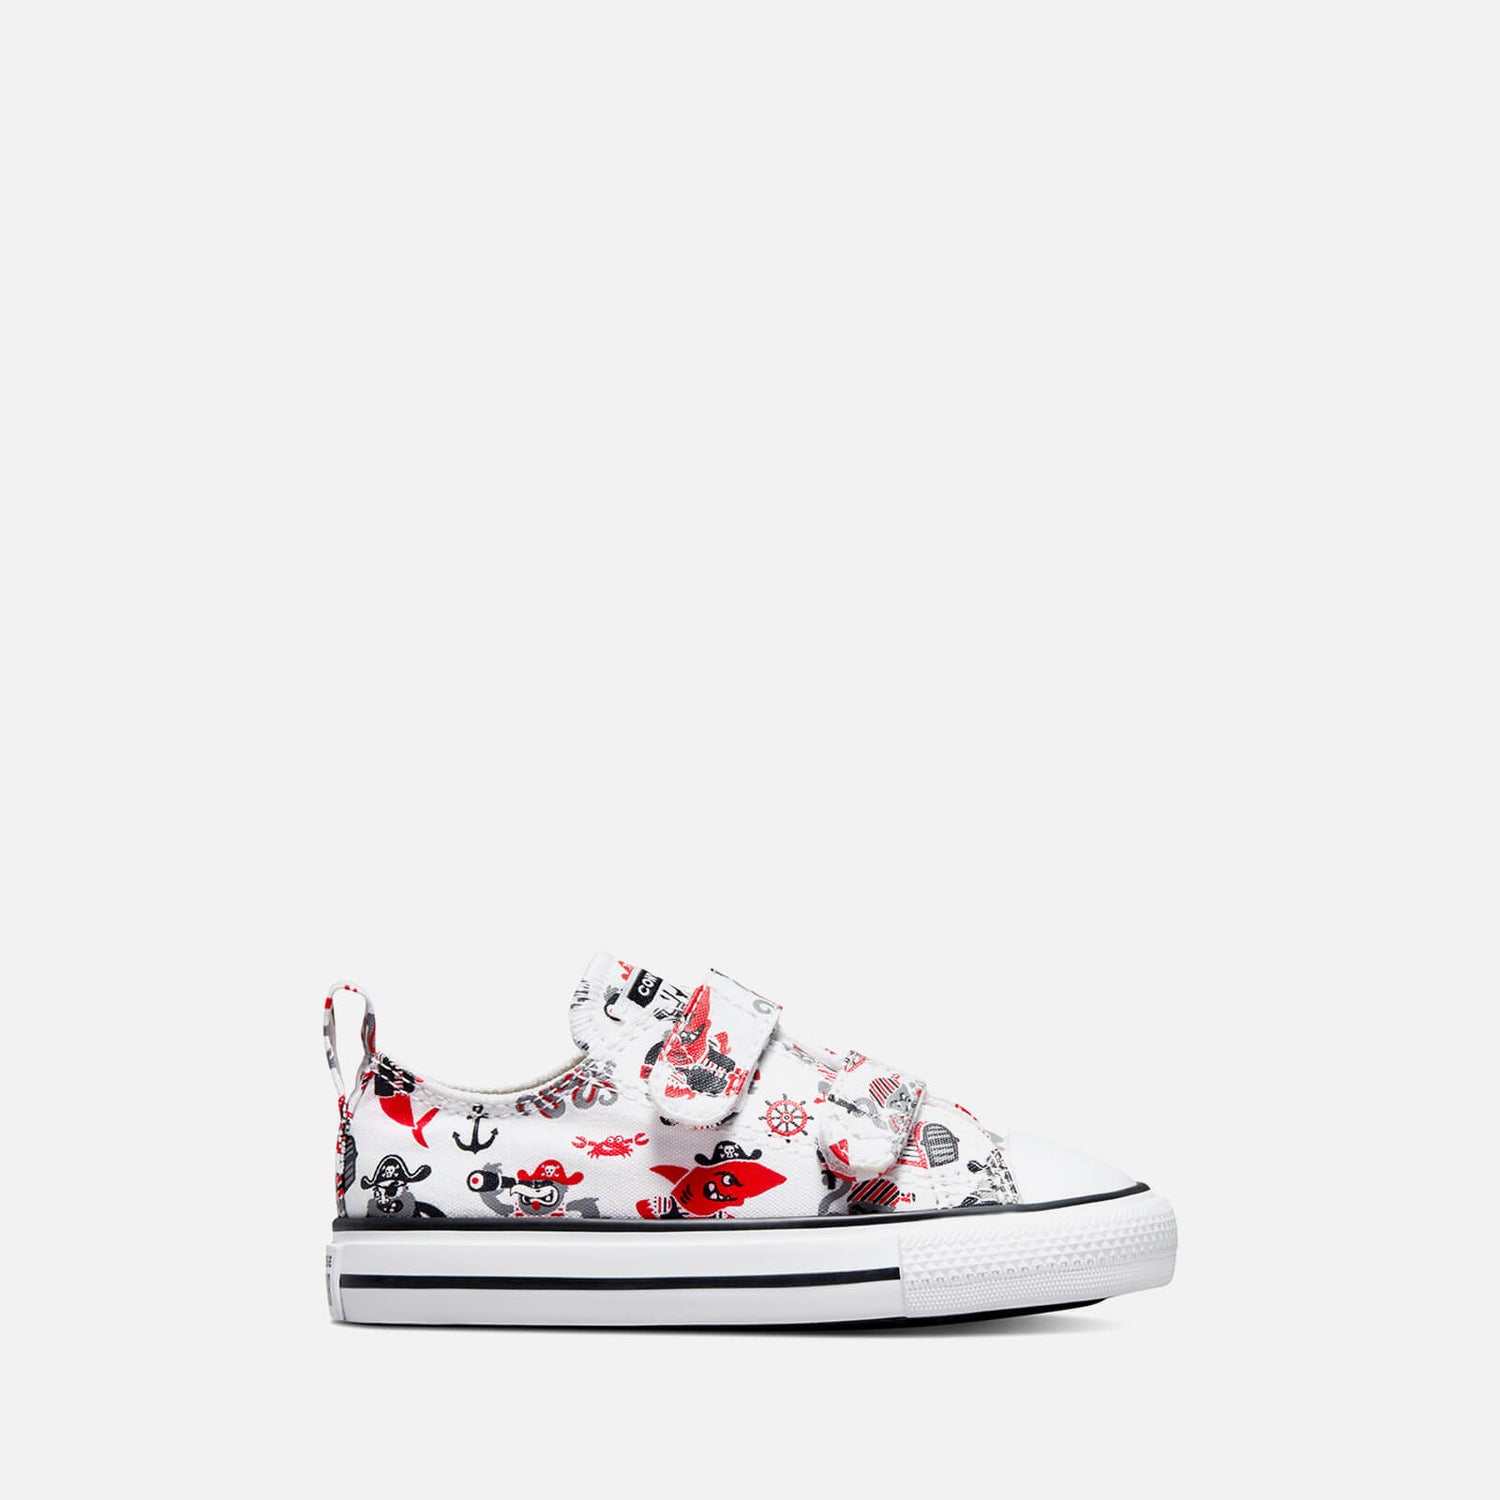 Converse Toddlers' Chuck Taylor All Star 2V Pirate Trainers - White/University Red/Black - UK 4 Baby